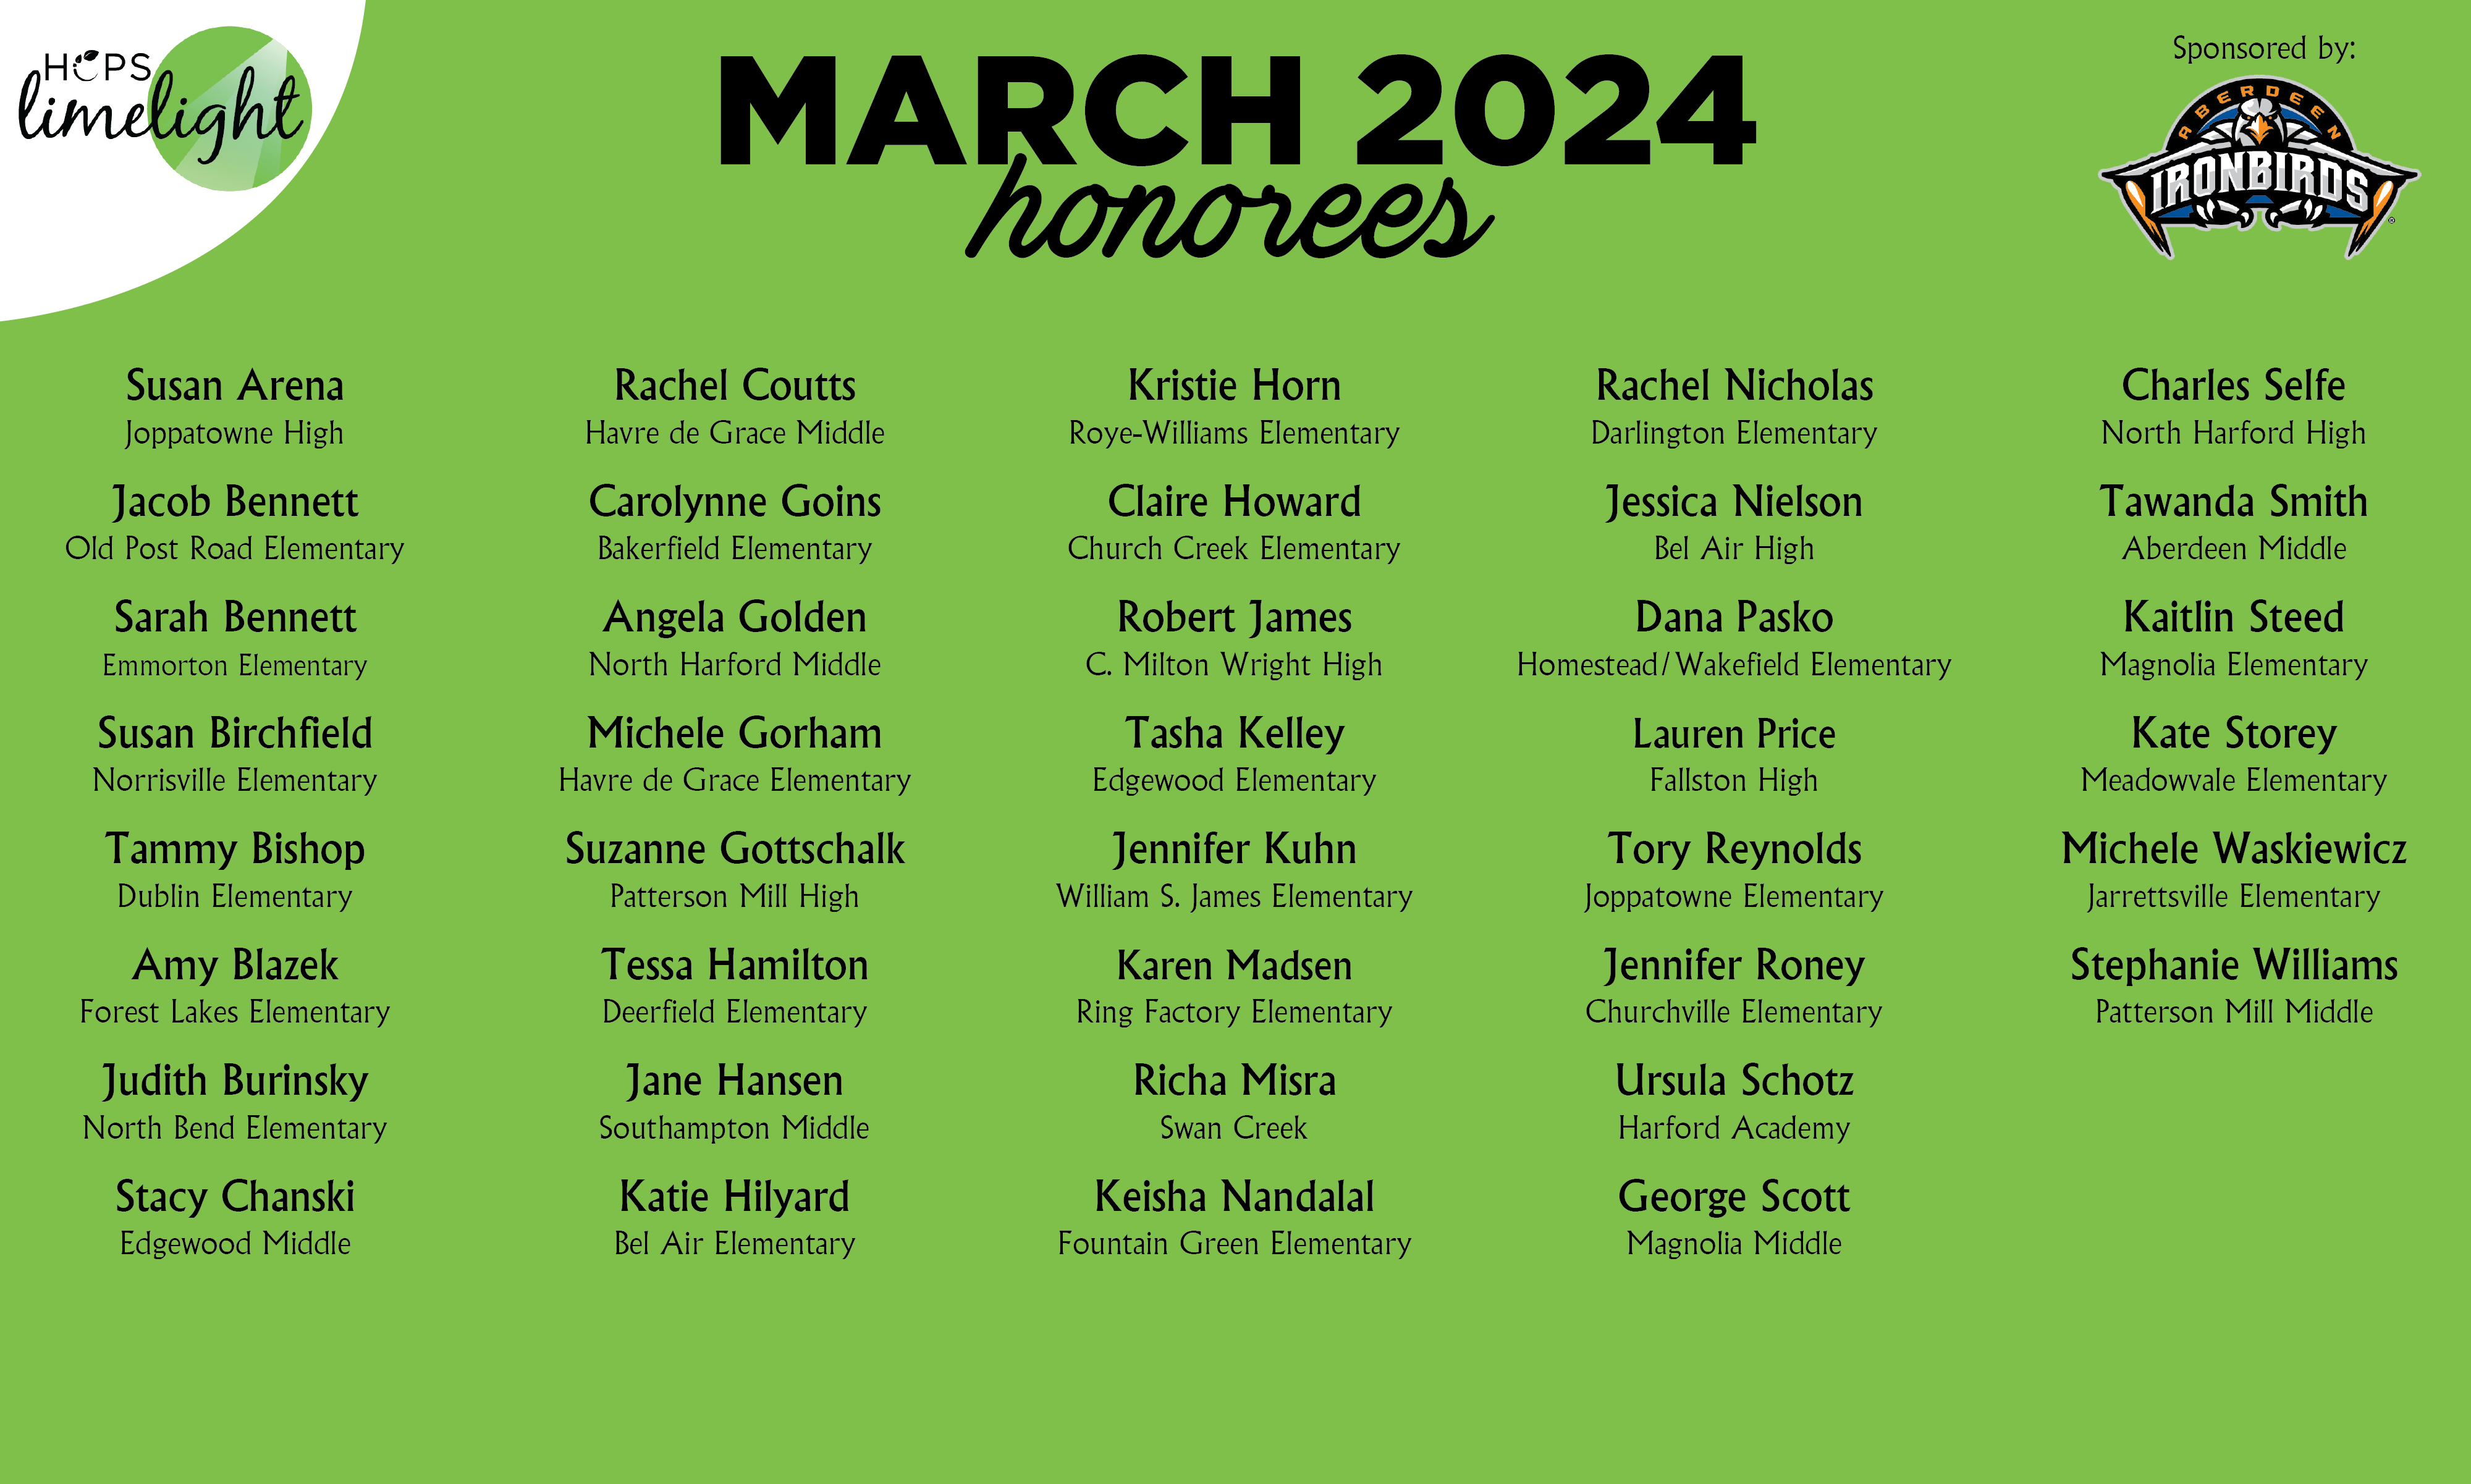 HCPS Limelight Honorees - March 2024